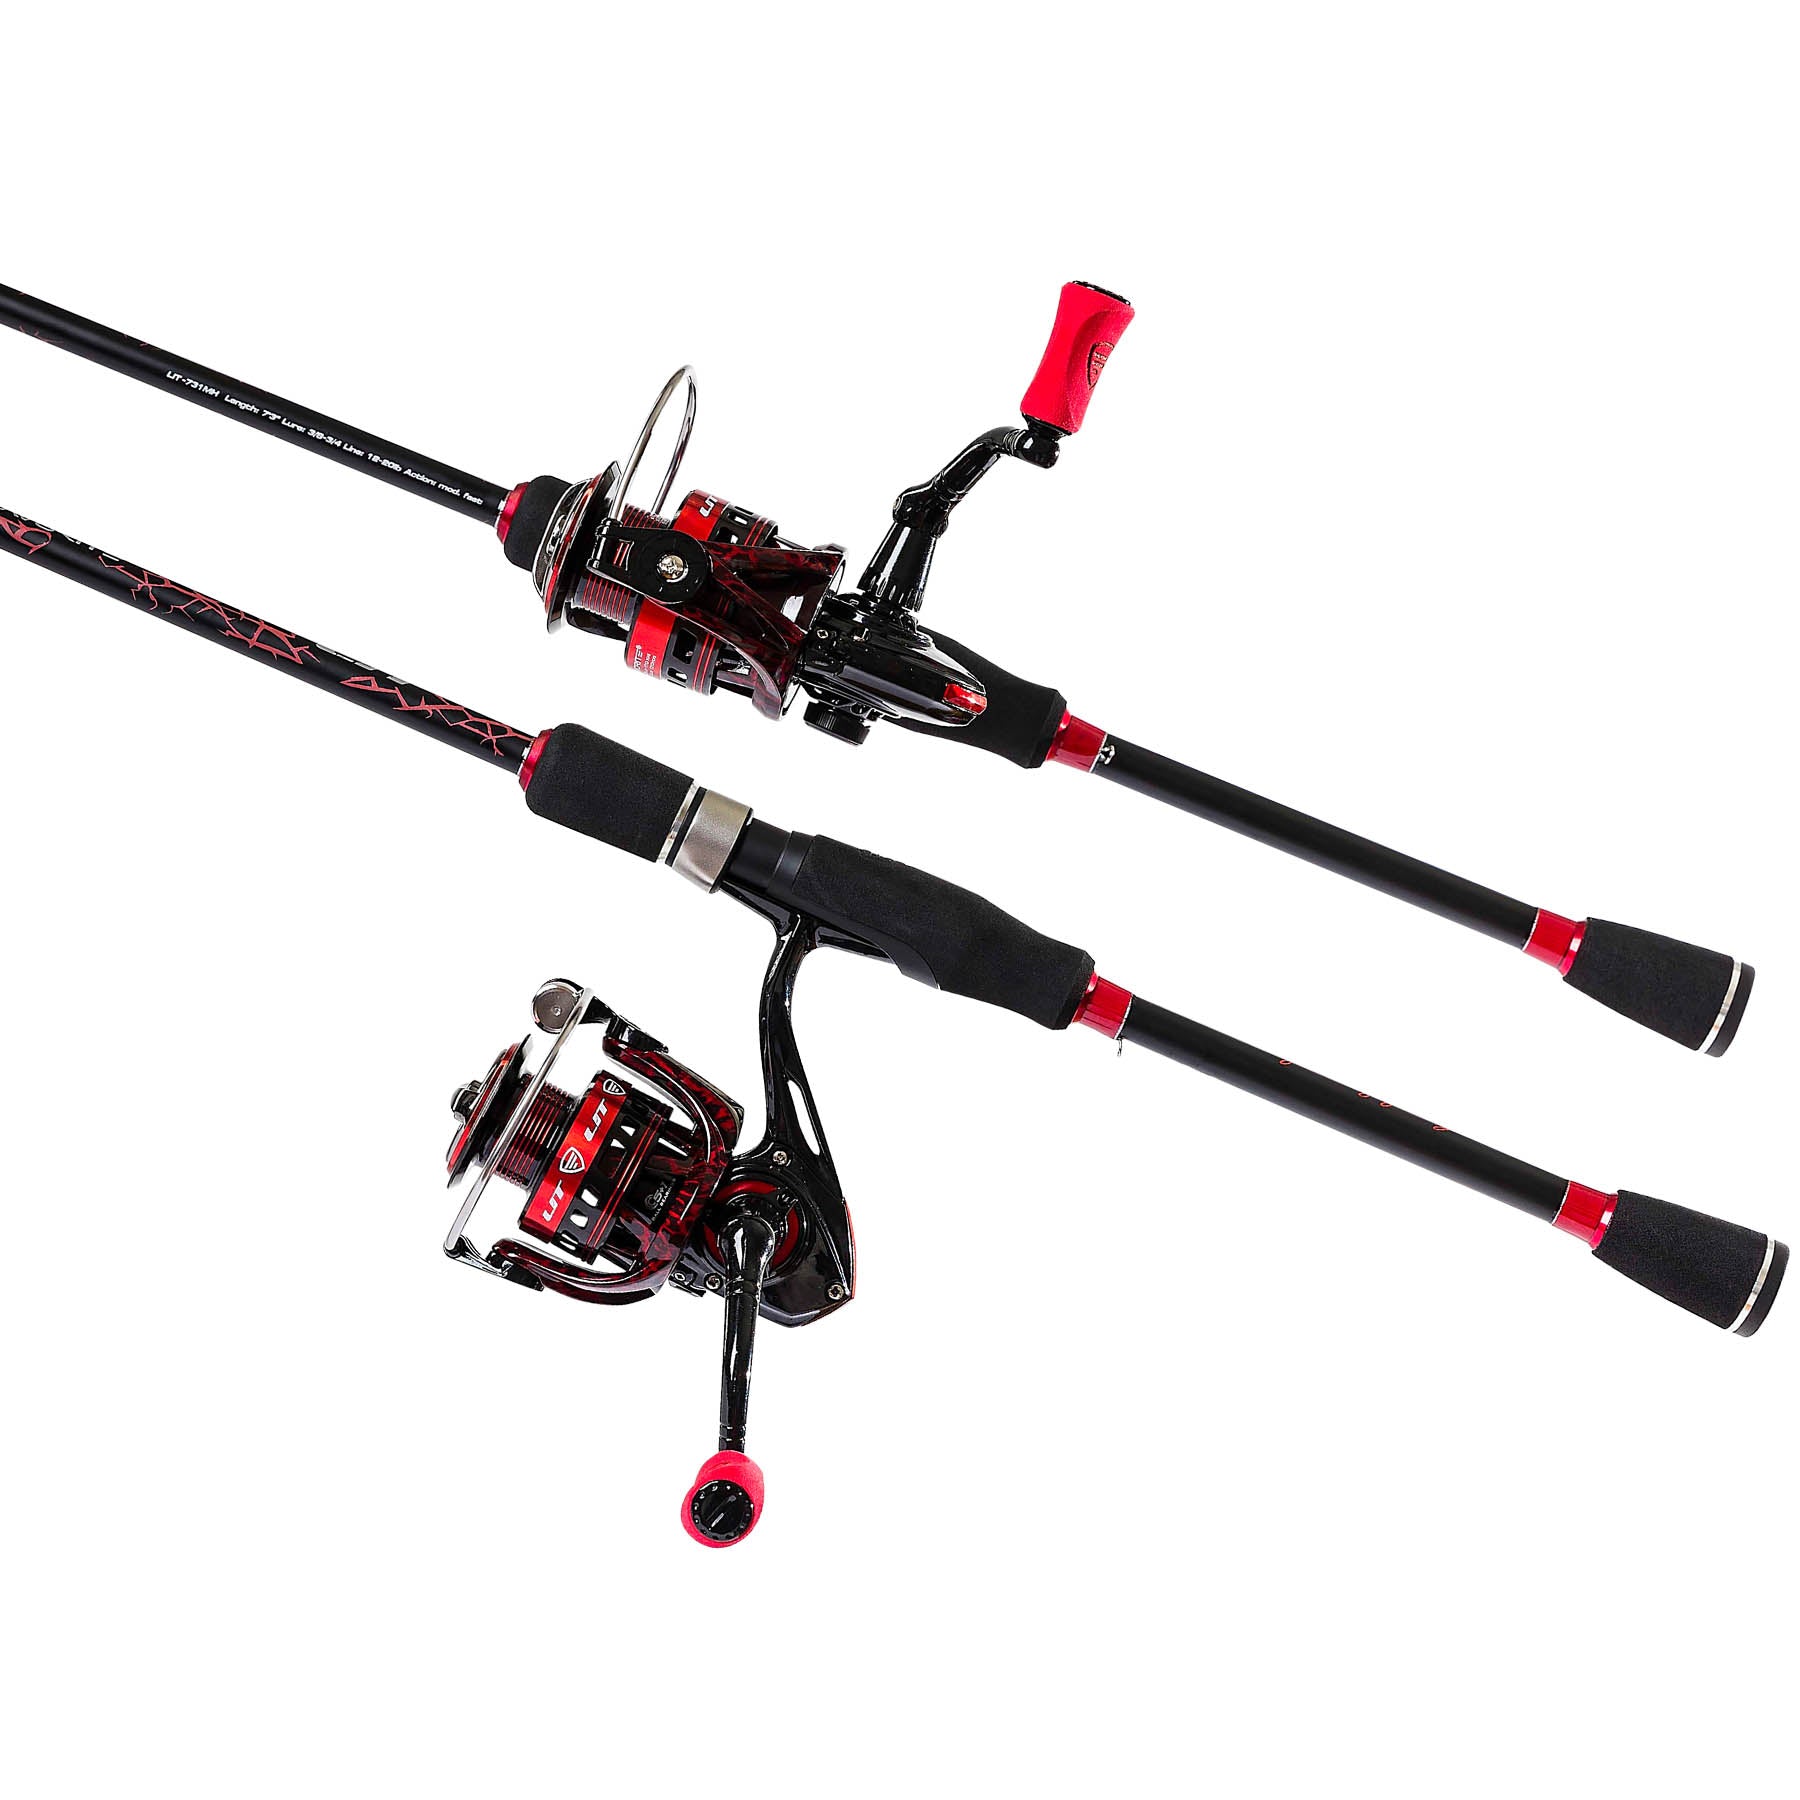 Complete Saltwater Kit Fishing Rod and Reel Spinning Combo Goods